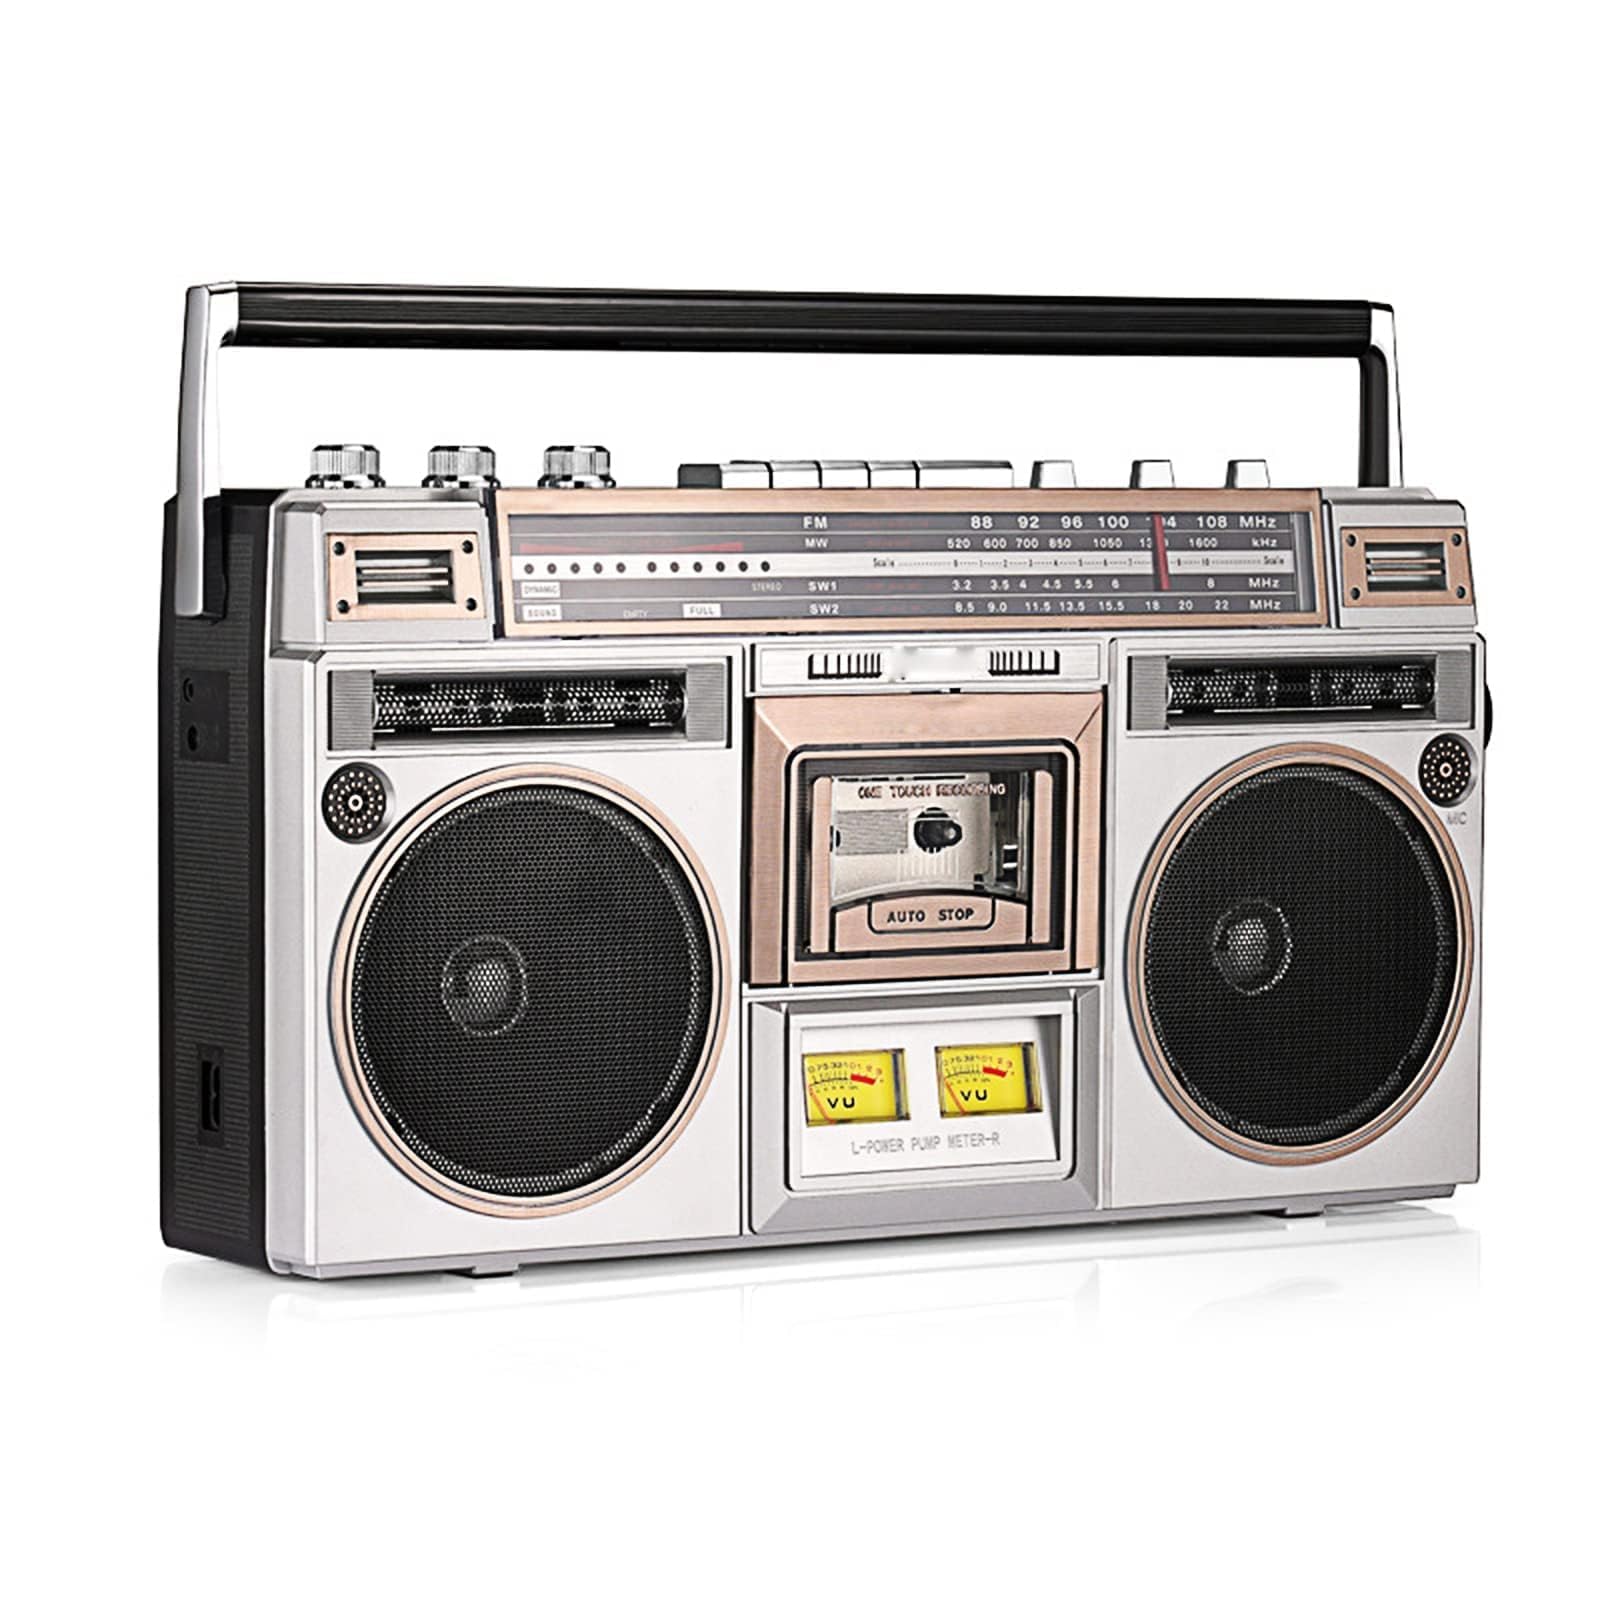 Cassette Boombox, Radio Cassette Player Recorder, AM/FM Radio, Wireless Streaming, USB/Micro SD Slots, Aux In, Headphone Jack, Convert Cassettes to USB/SD, Classic 80s Style Retro